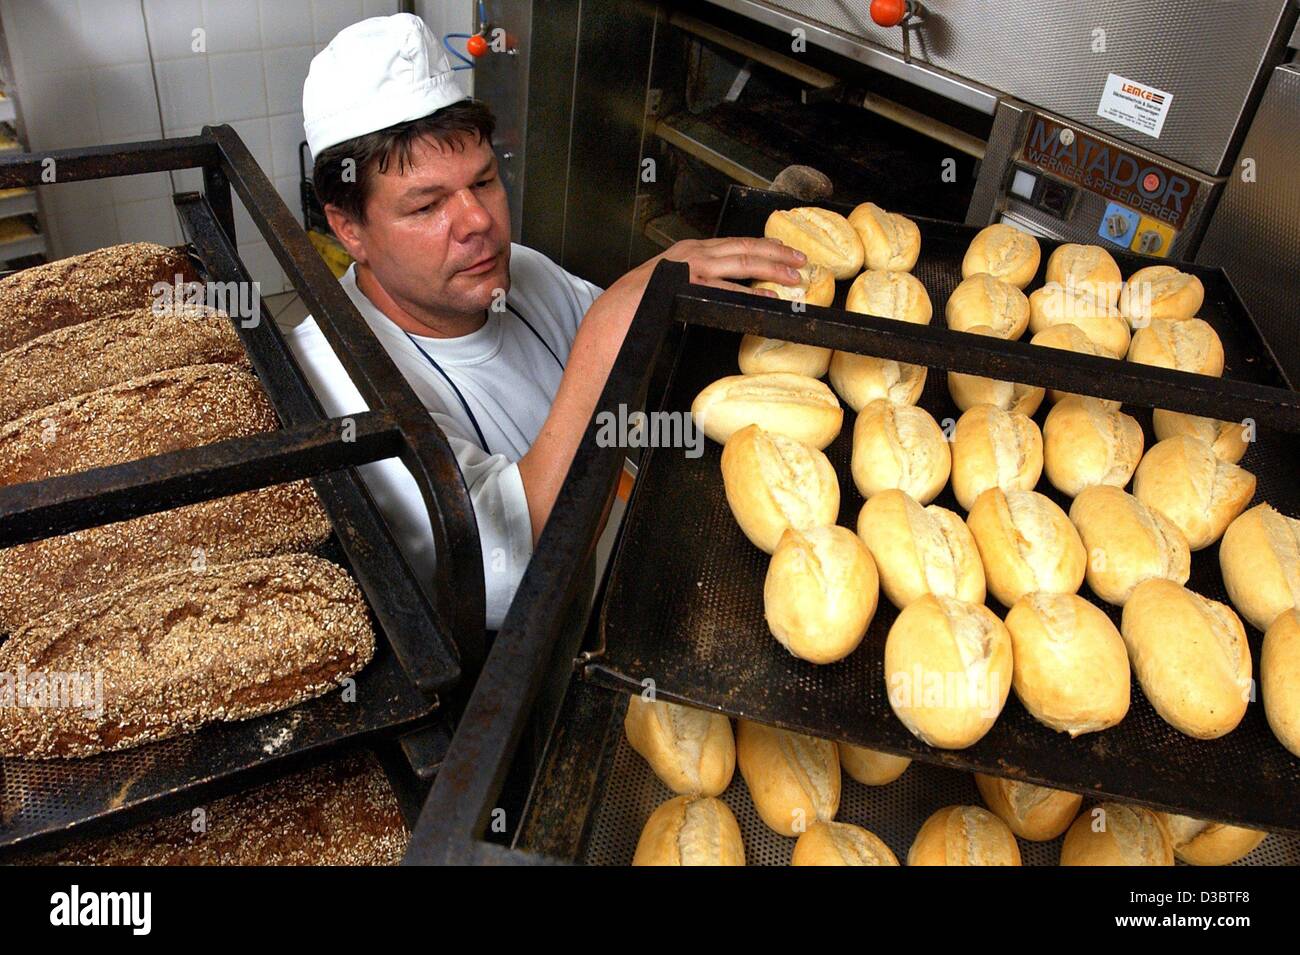 (dpa) - Baker Uwe Badel pushes a cart with baking trays of freshly baked bread rolls, in his bakery in Tramm, Germany, 10 September 2003. Stock Photo